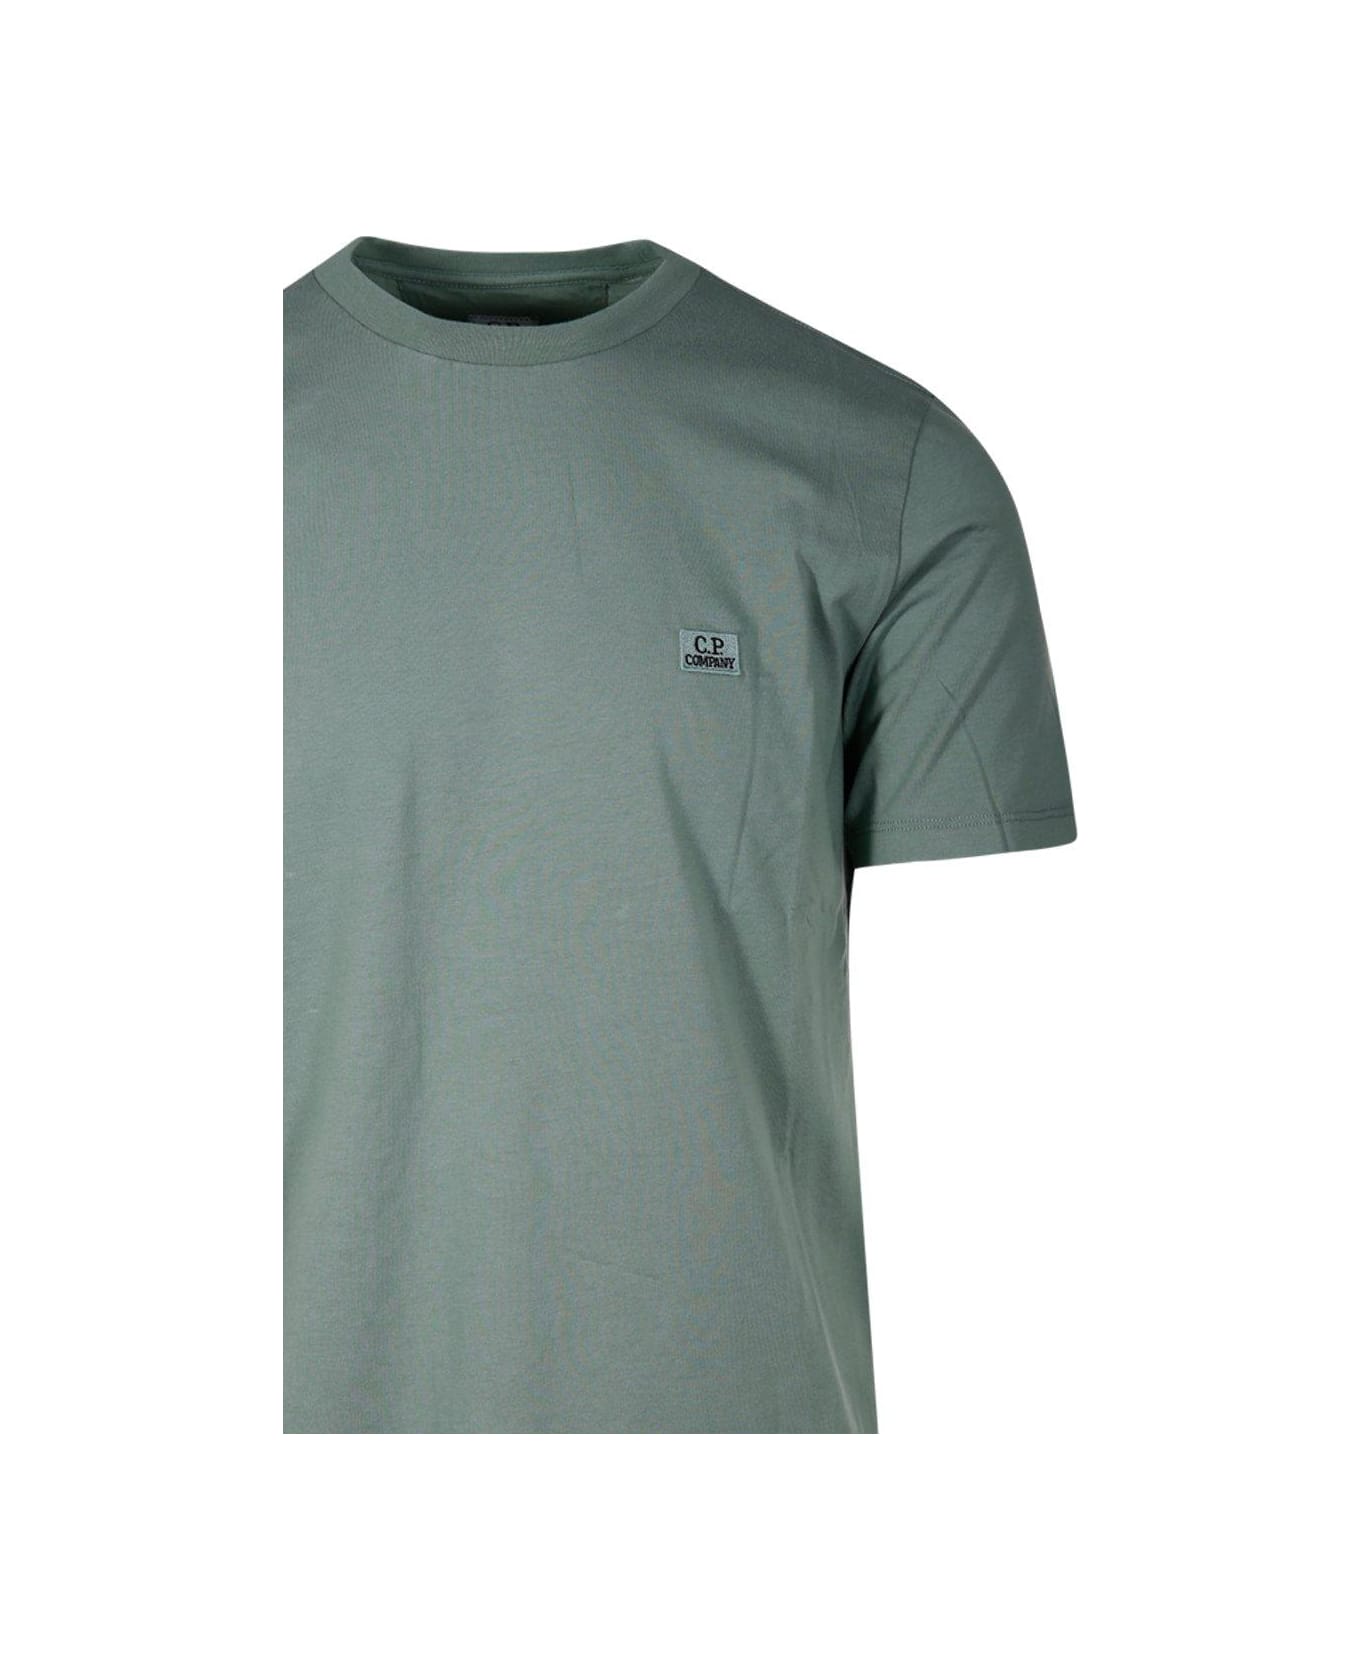 C.P. Company Logo Embroidered T-shirt - Verde